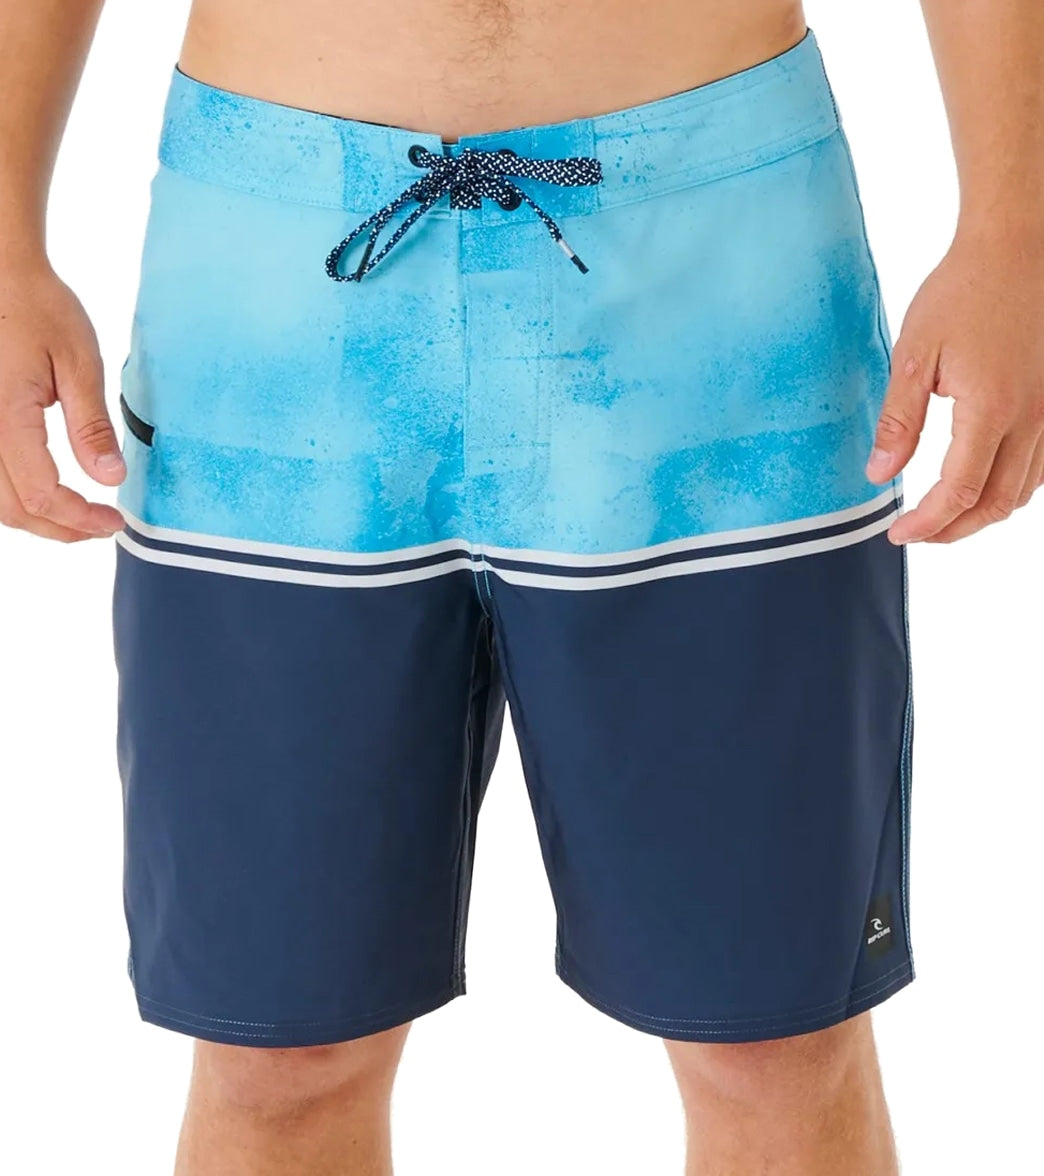 Rip Curl Men's 19" Mirage Combined 2.0 Board Shorts at SwimOutlet.com